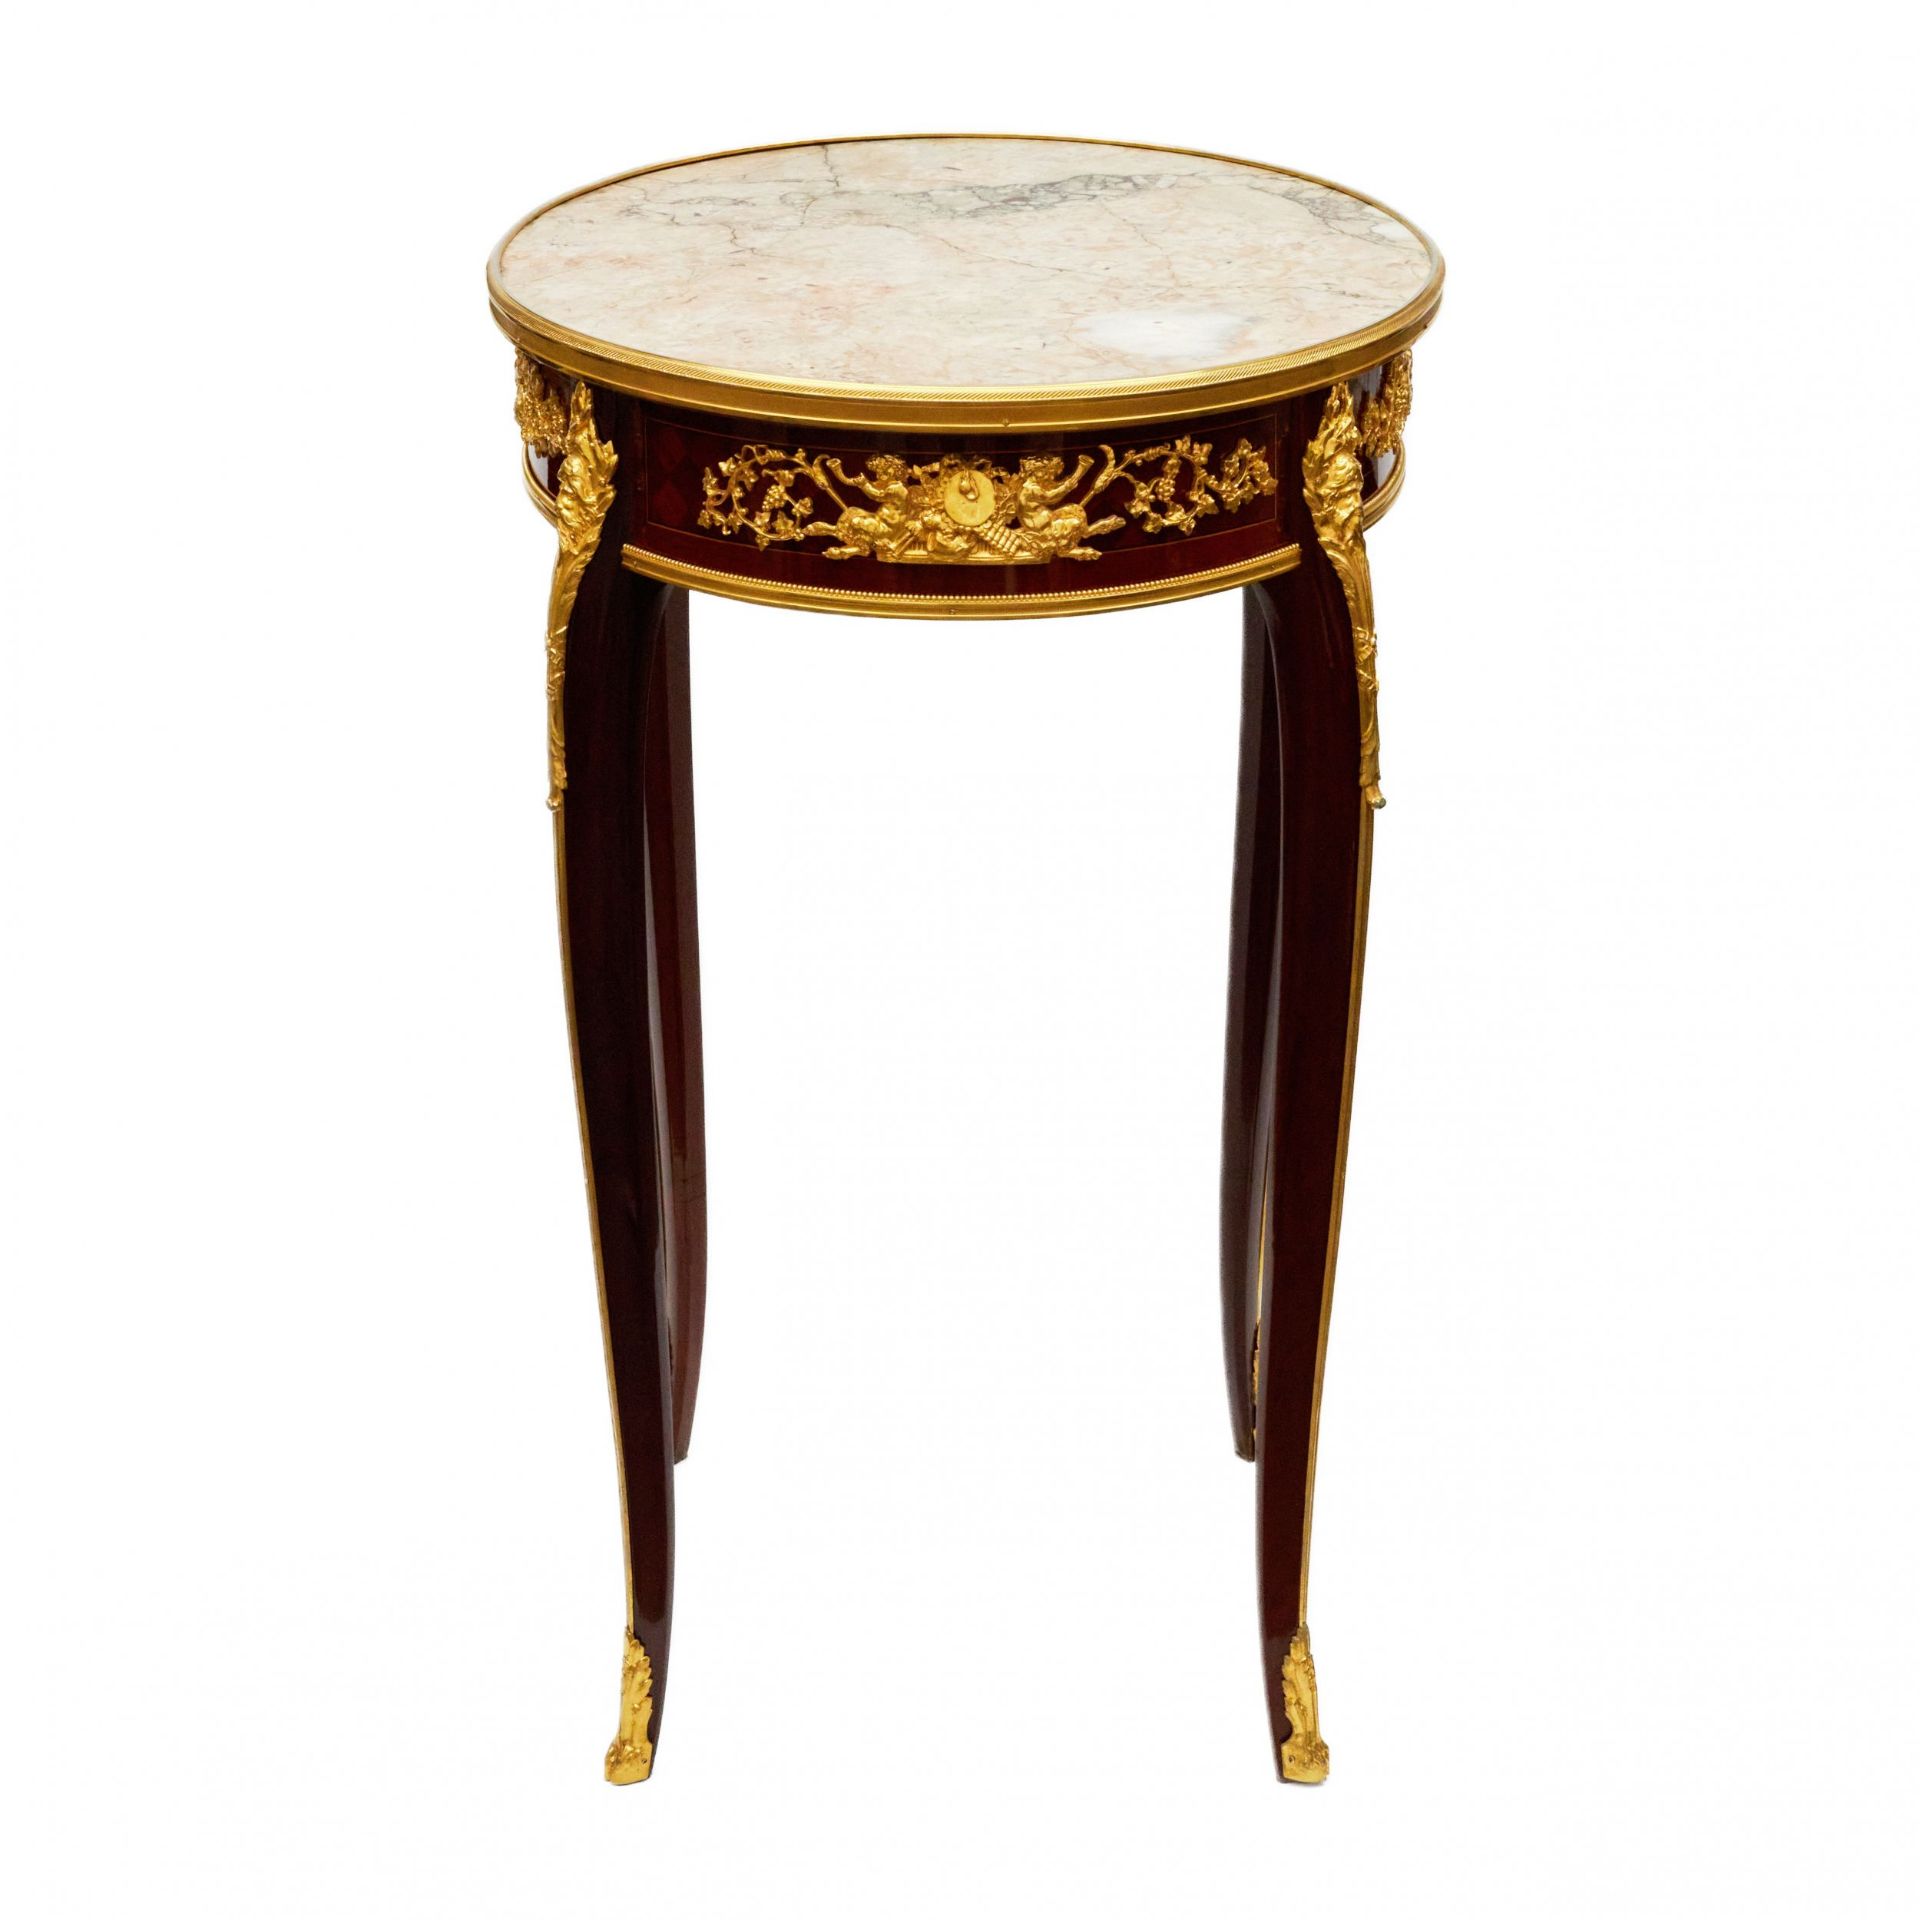 Magnificent mahogany and gilded bronze table by Francois Linke. - Image 3 of 5